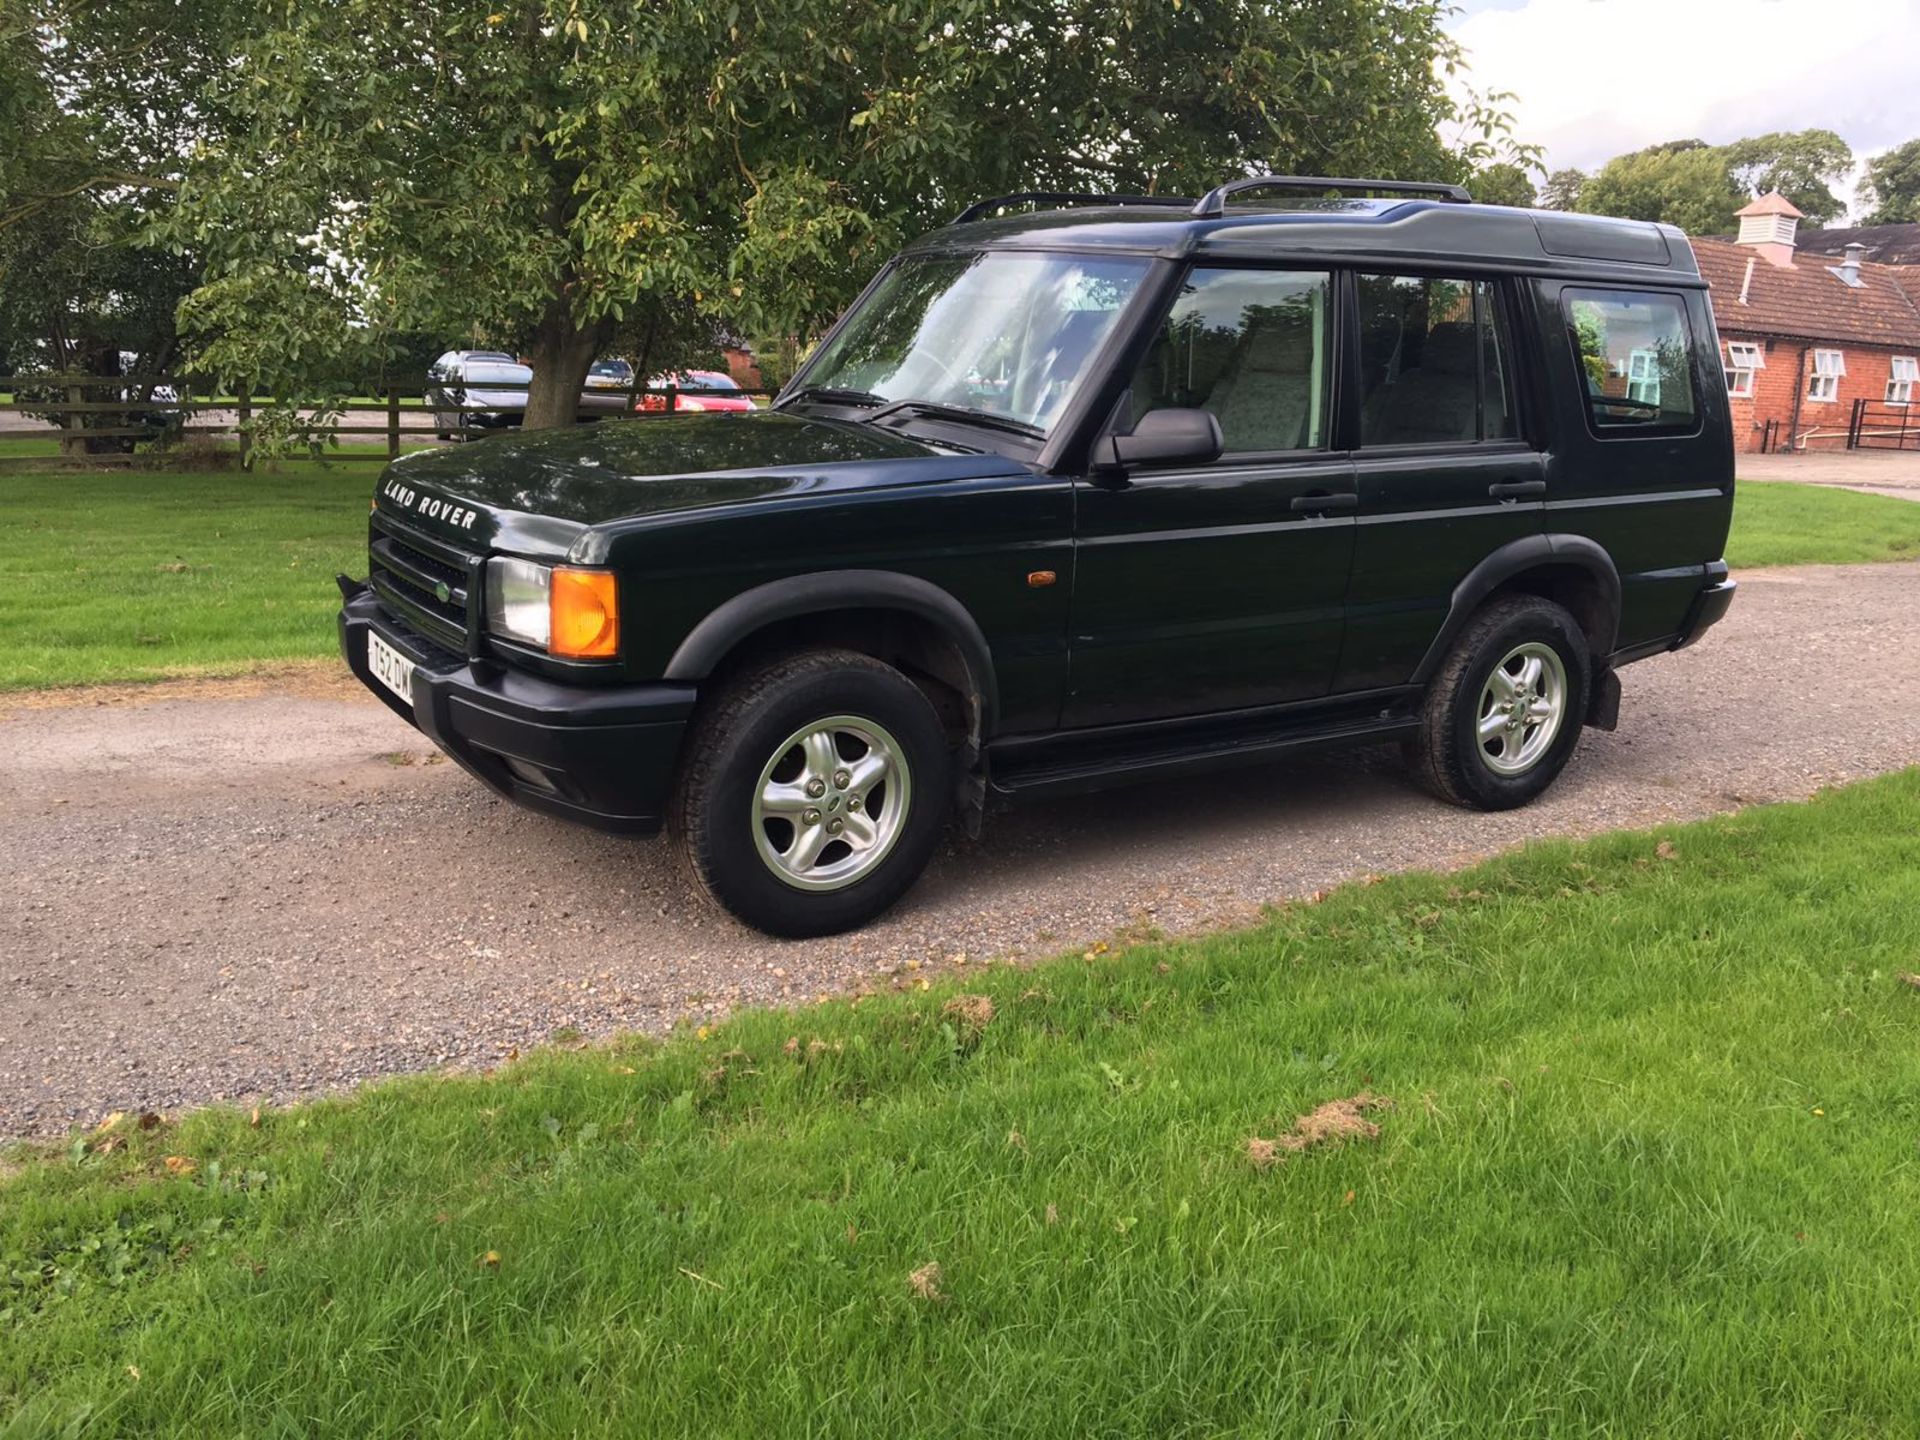 1999 REG LAND ROVER DISCOVERY GREEN, NEW ENGINE FITTED NOT LONG AGO AND COMES WITH NEW MOT *NO VAT* - Image 3 of 10